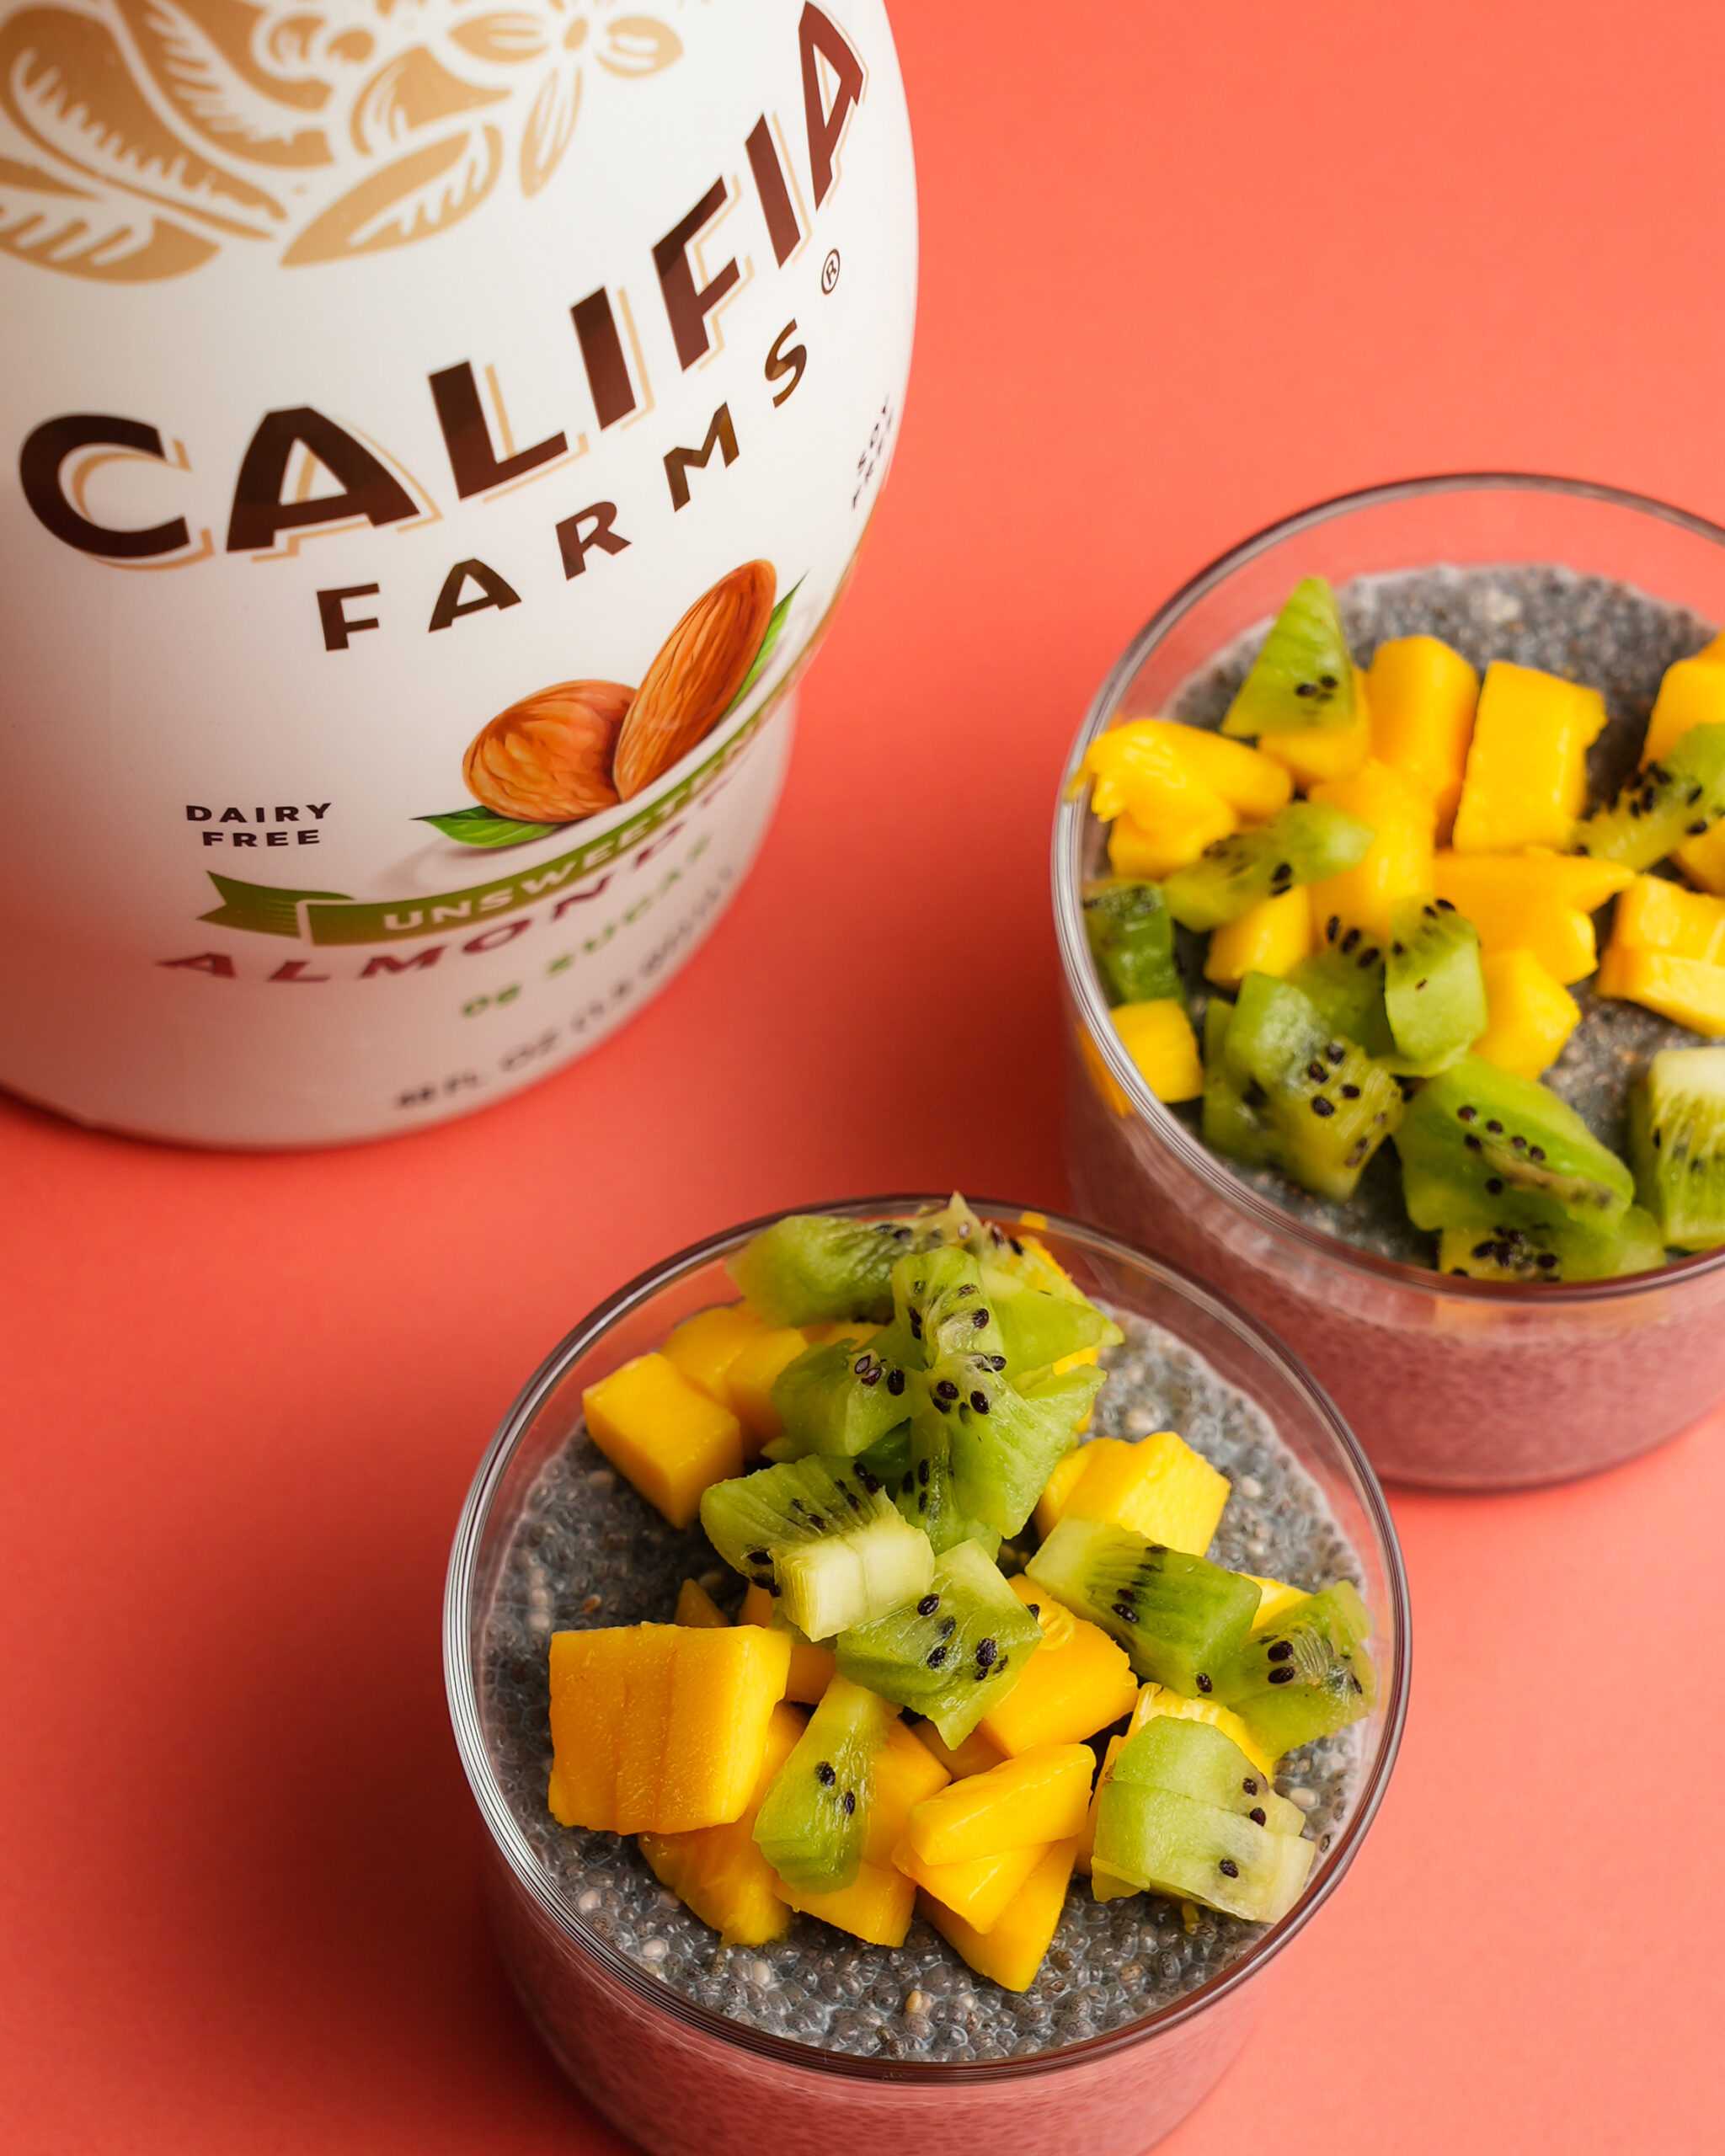 Two chia seed puddings with mango and kiwi on top sit in the front of the image, with Califia Farms Unsweetened Almondmilk off to the side.